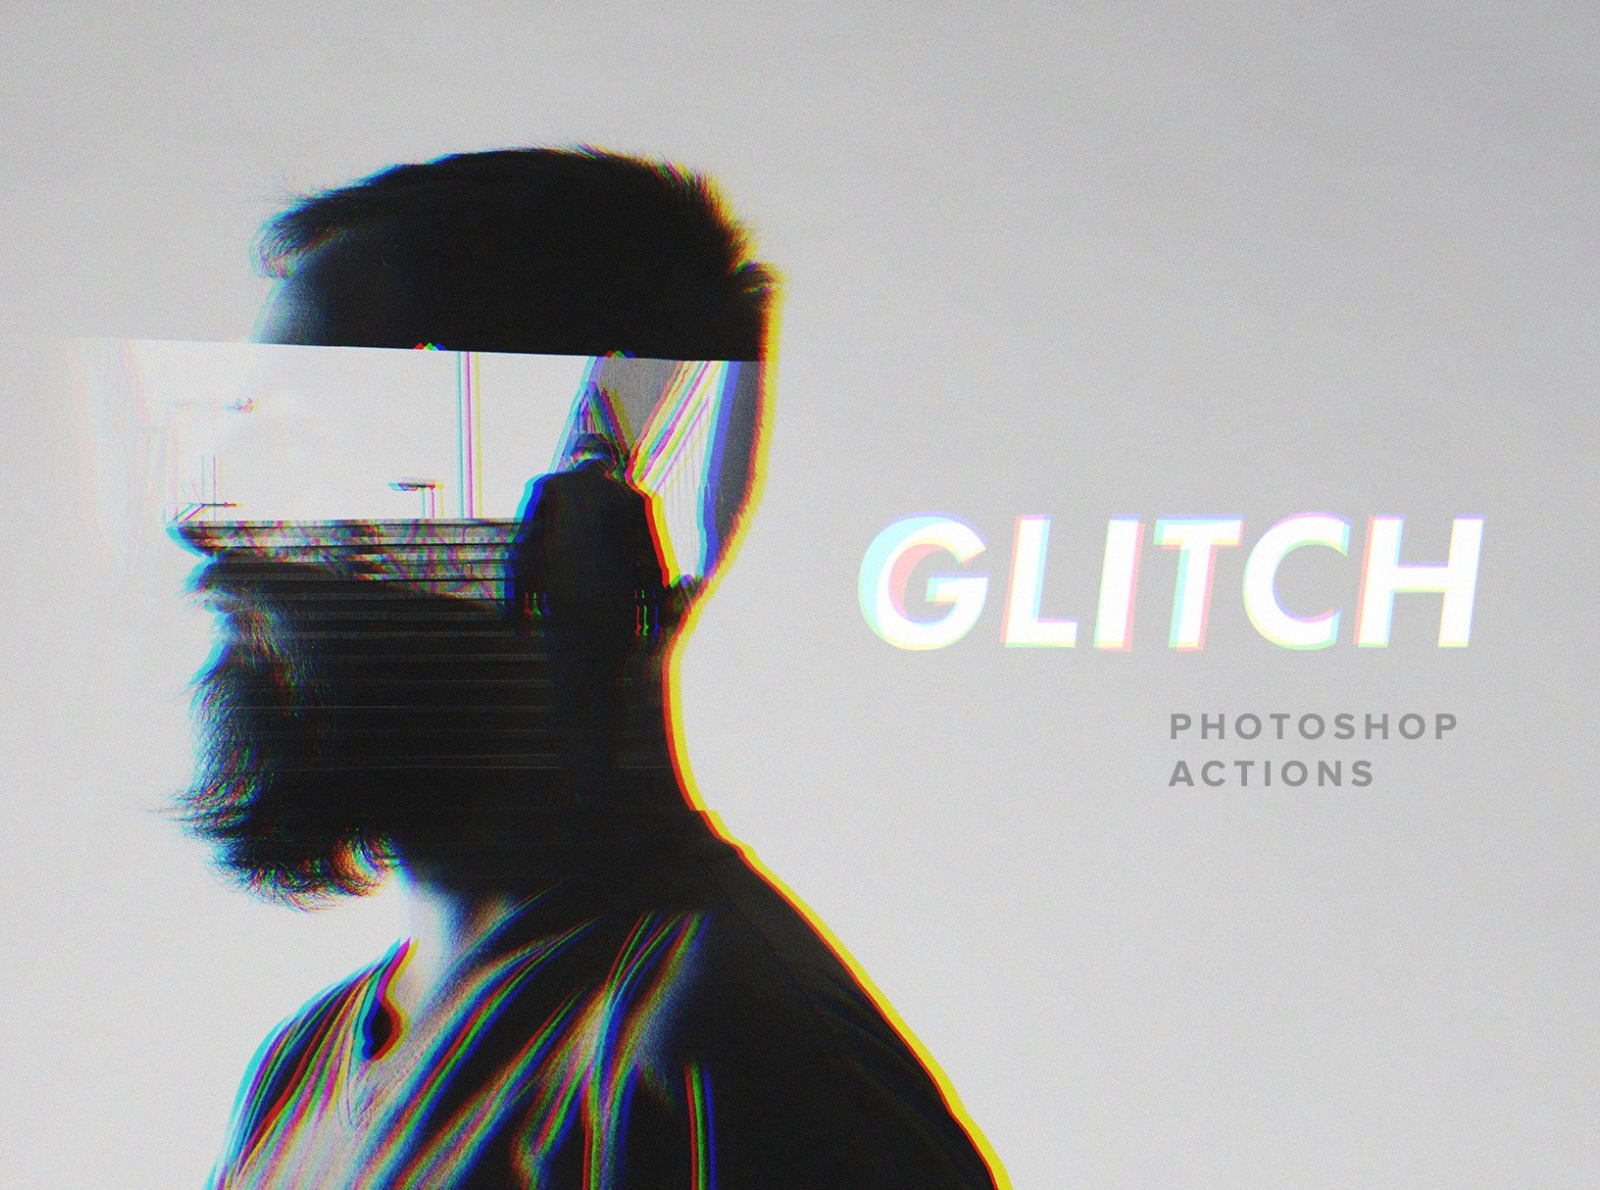 Retro Glitch Photo Effect, Actions and Presets Including: photo